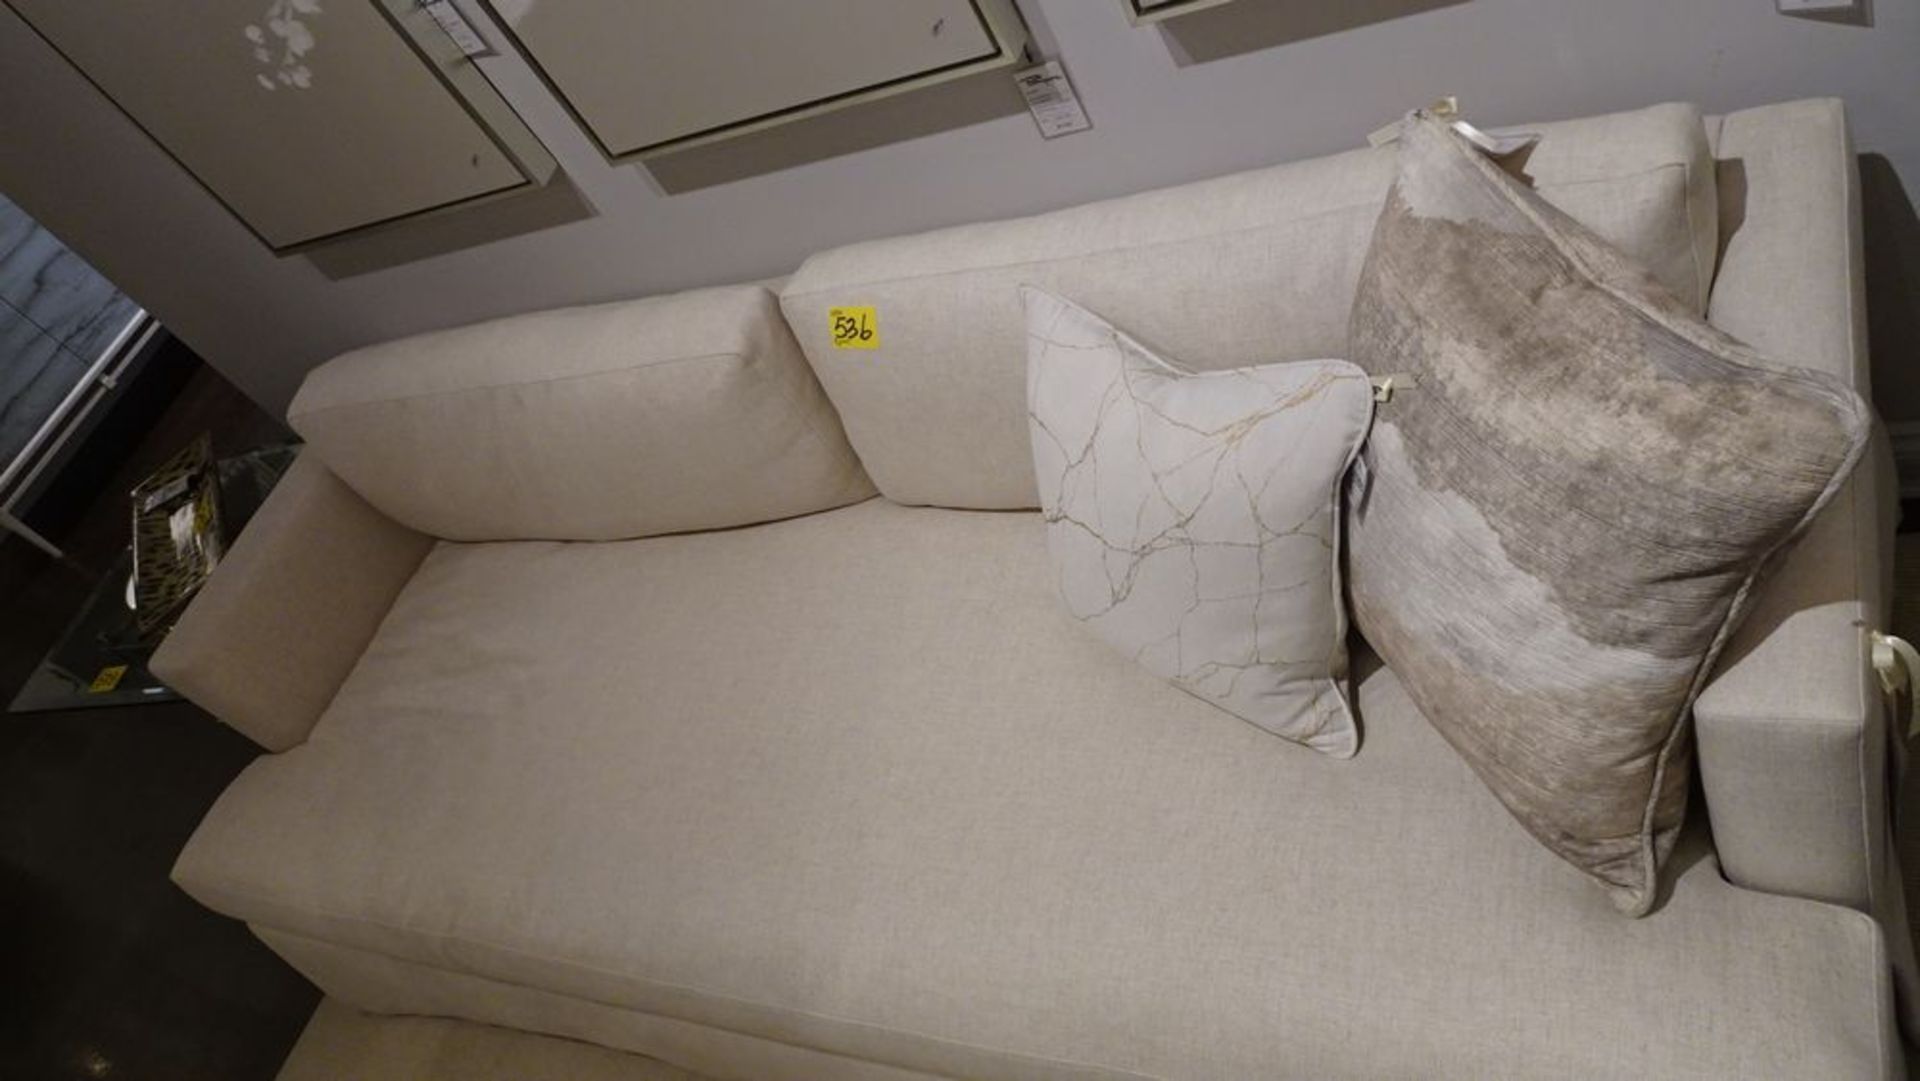 3 SEATER SOFA - CRÈME LINEN, ONE CUSHION W/TOSS PILLOWS (MSRP $7670) - Image 4 of 5